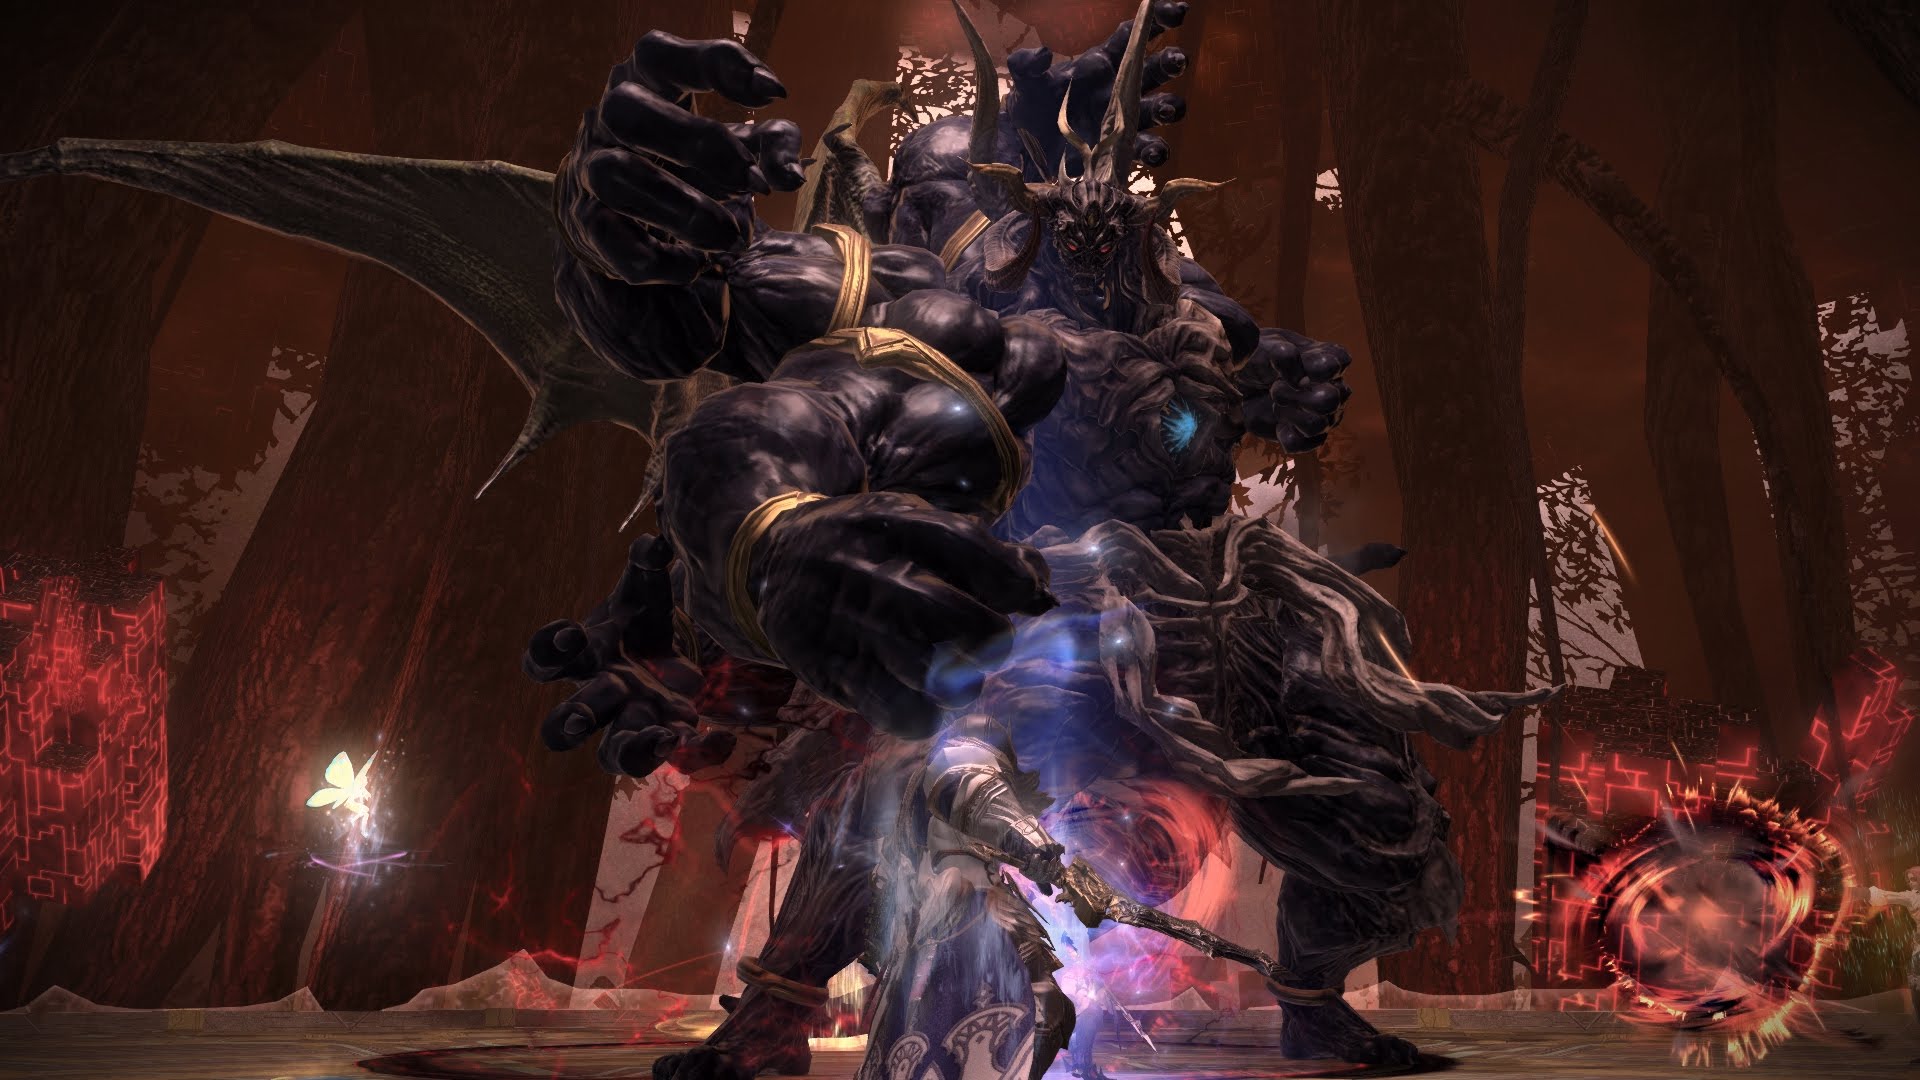 FINAL FANTASY XIV Patch 3.2 - The Gears of Change